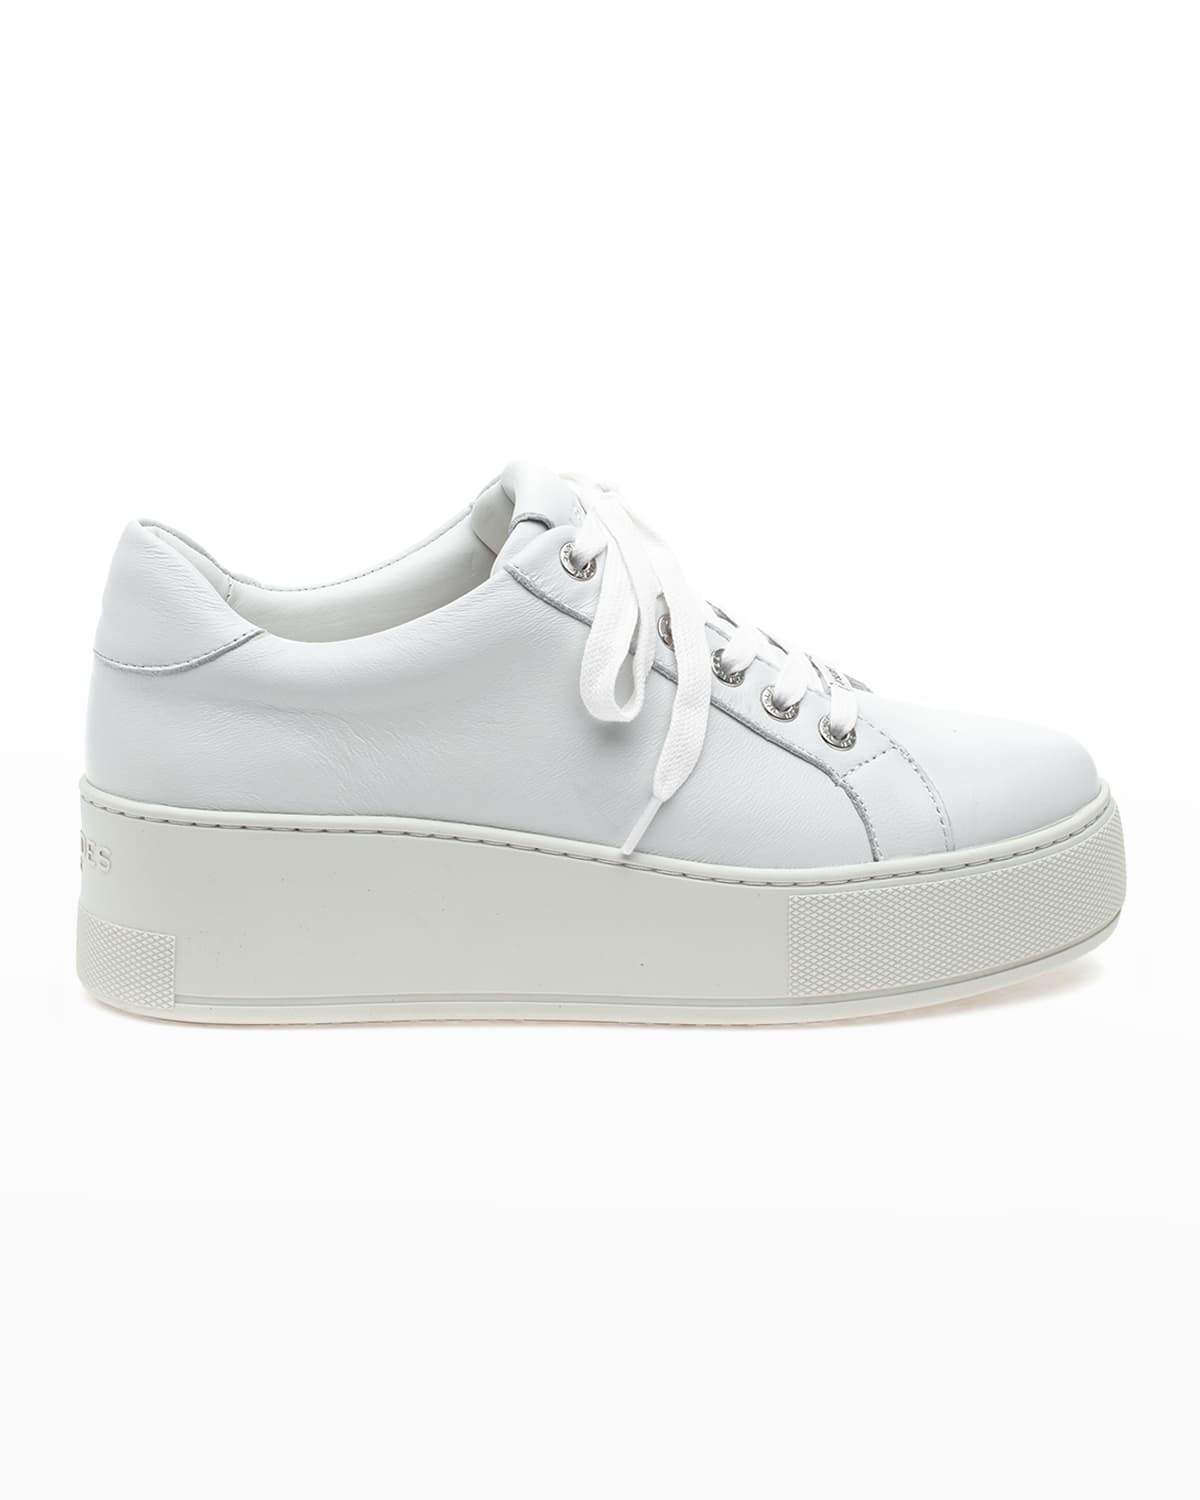 Jslides White Leather Sneaker | Neiman Marcus